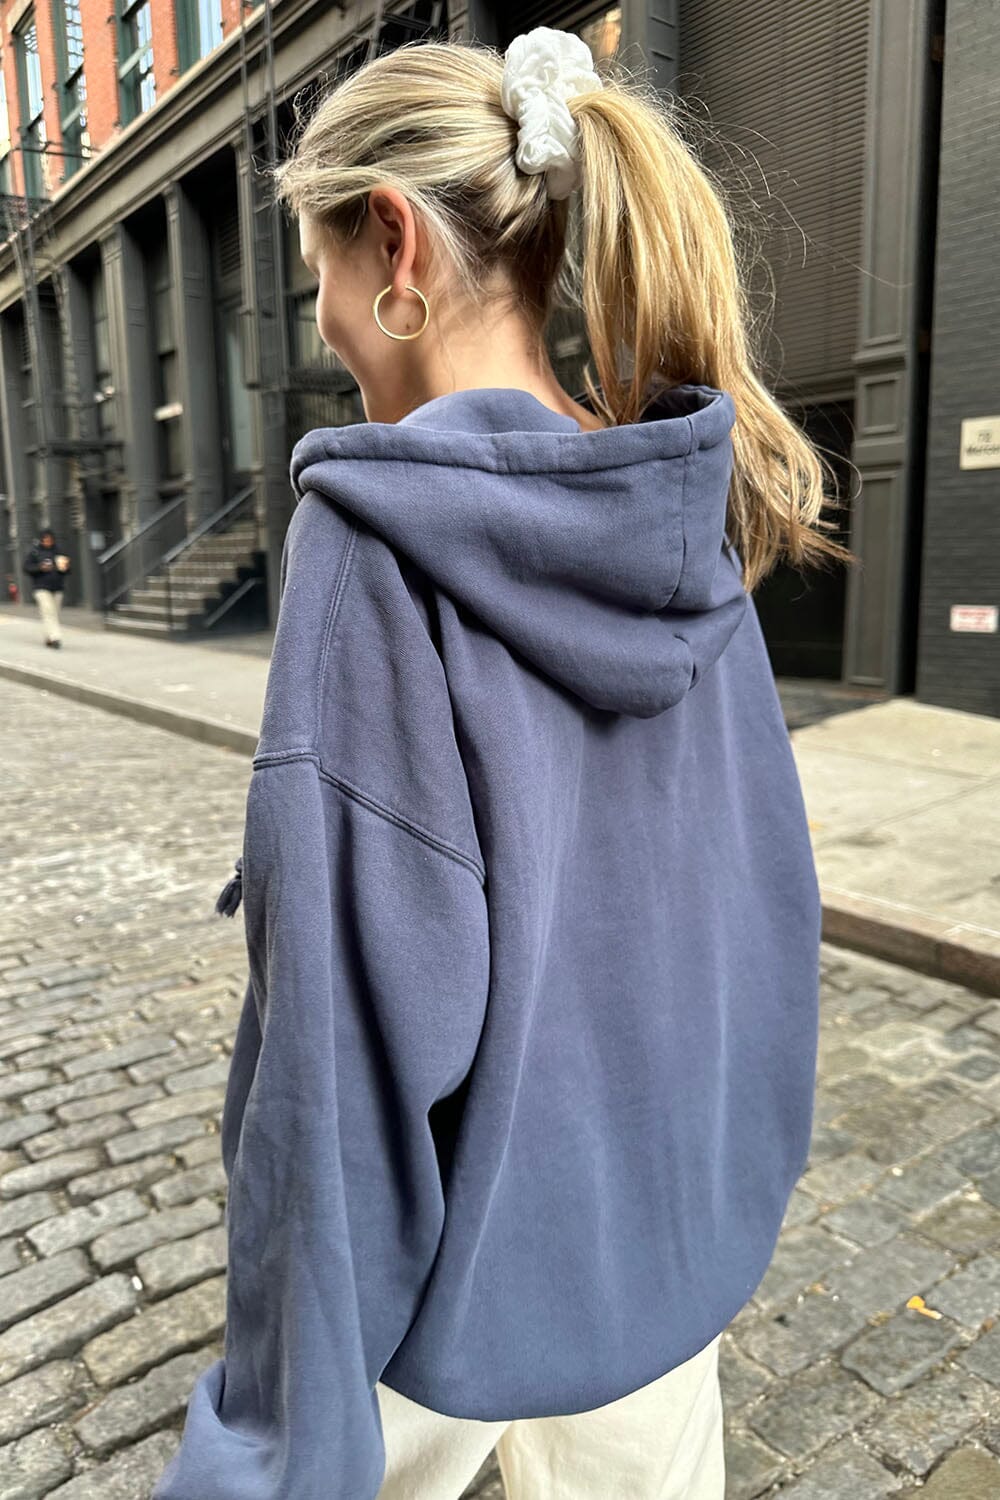 Brandy Melville New York Hoodie Blue - $45 (10% Off Retail) - From